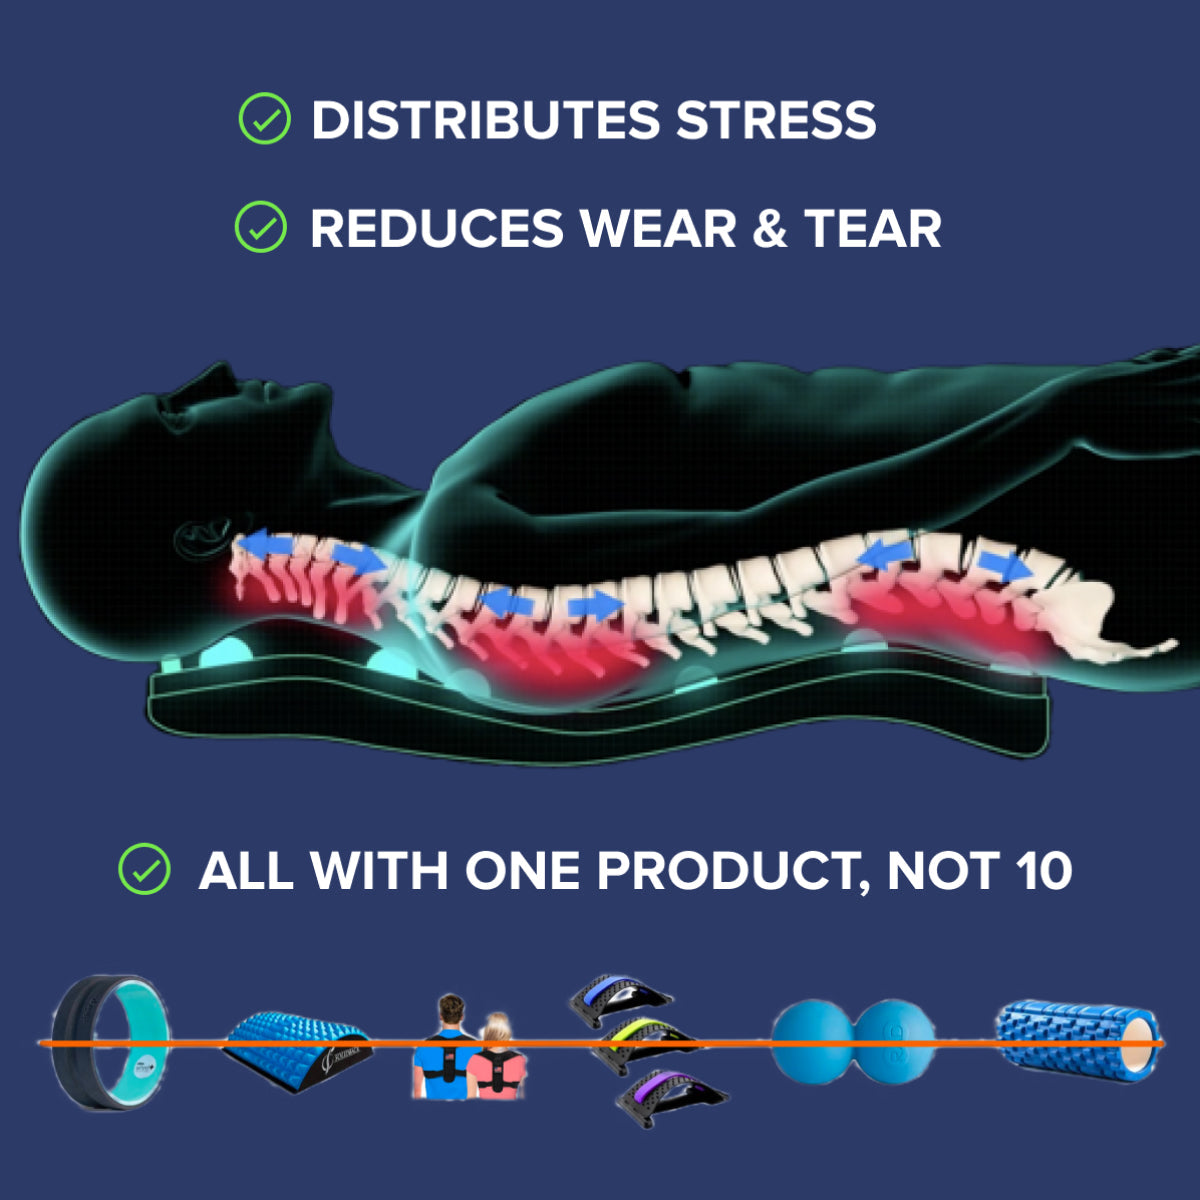 Benefits of the Trigger Point Rocker including distributing stress, reducing wear and tear, and being an all-in-one solution for muscle tension relief and posture improvement.